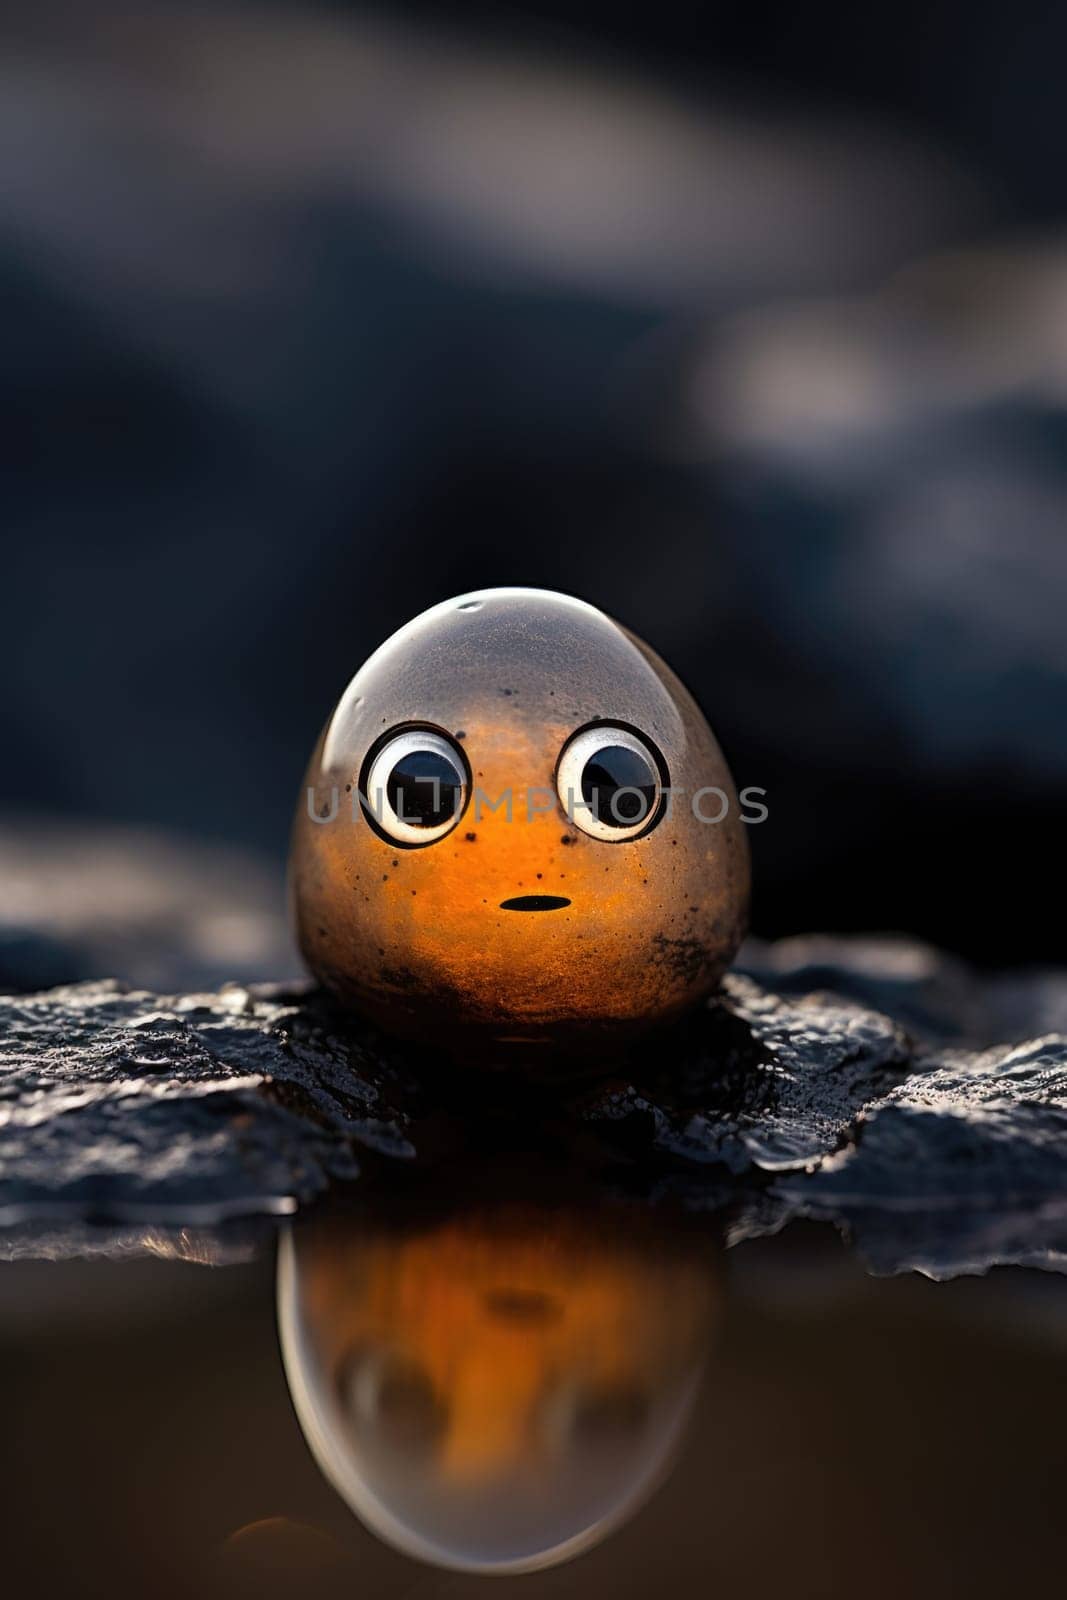 A small orange ball with eyes sitting on a rock, AI. Pareidolia. by starush